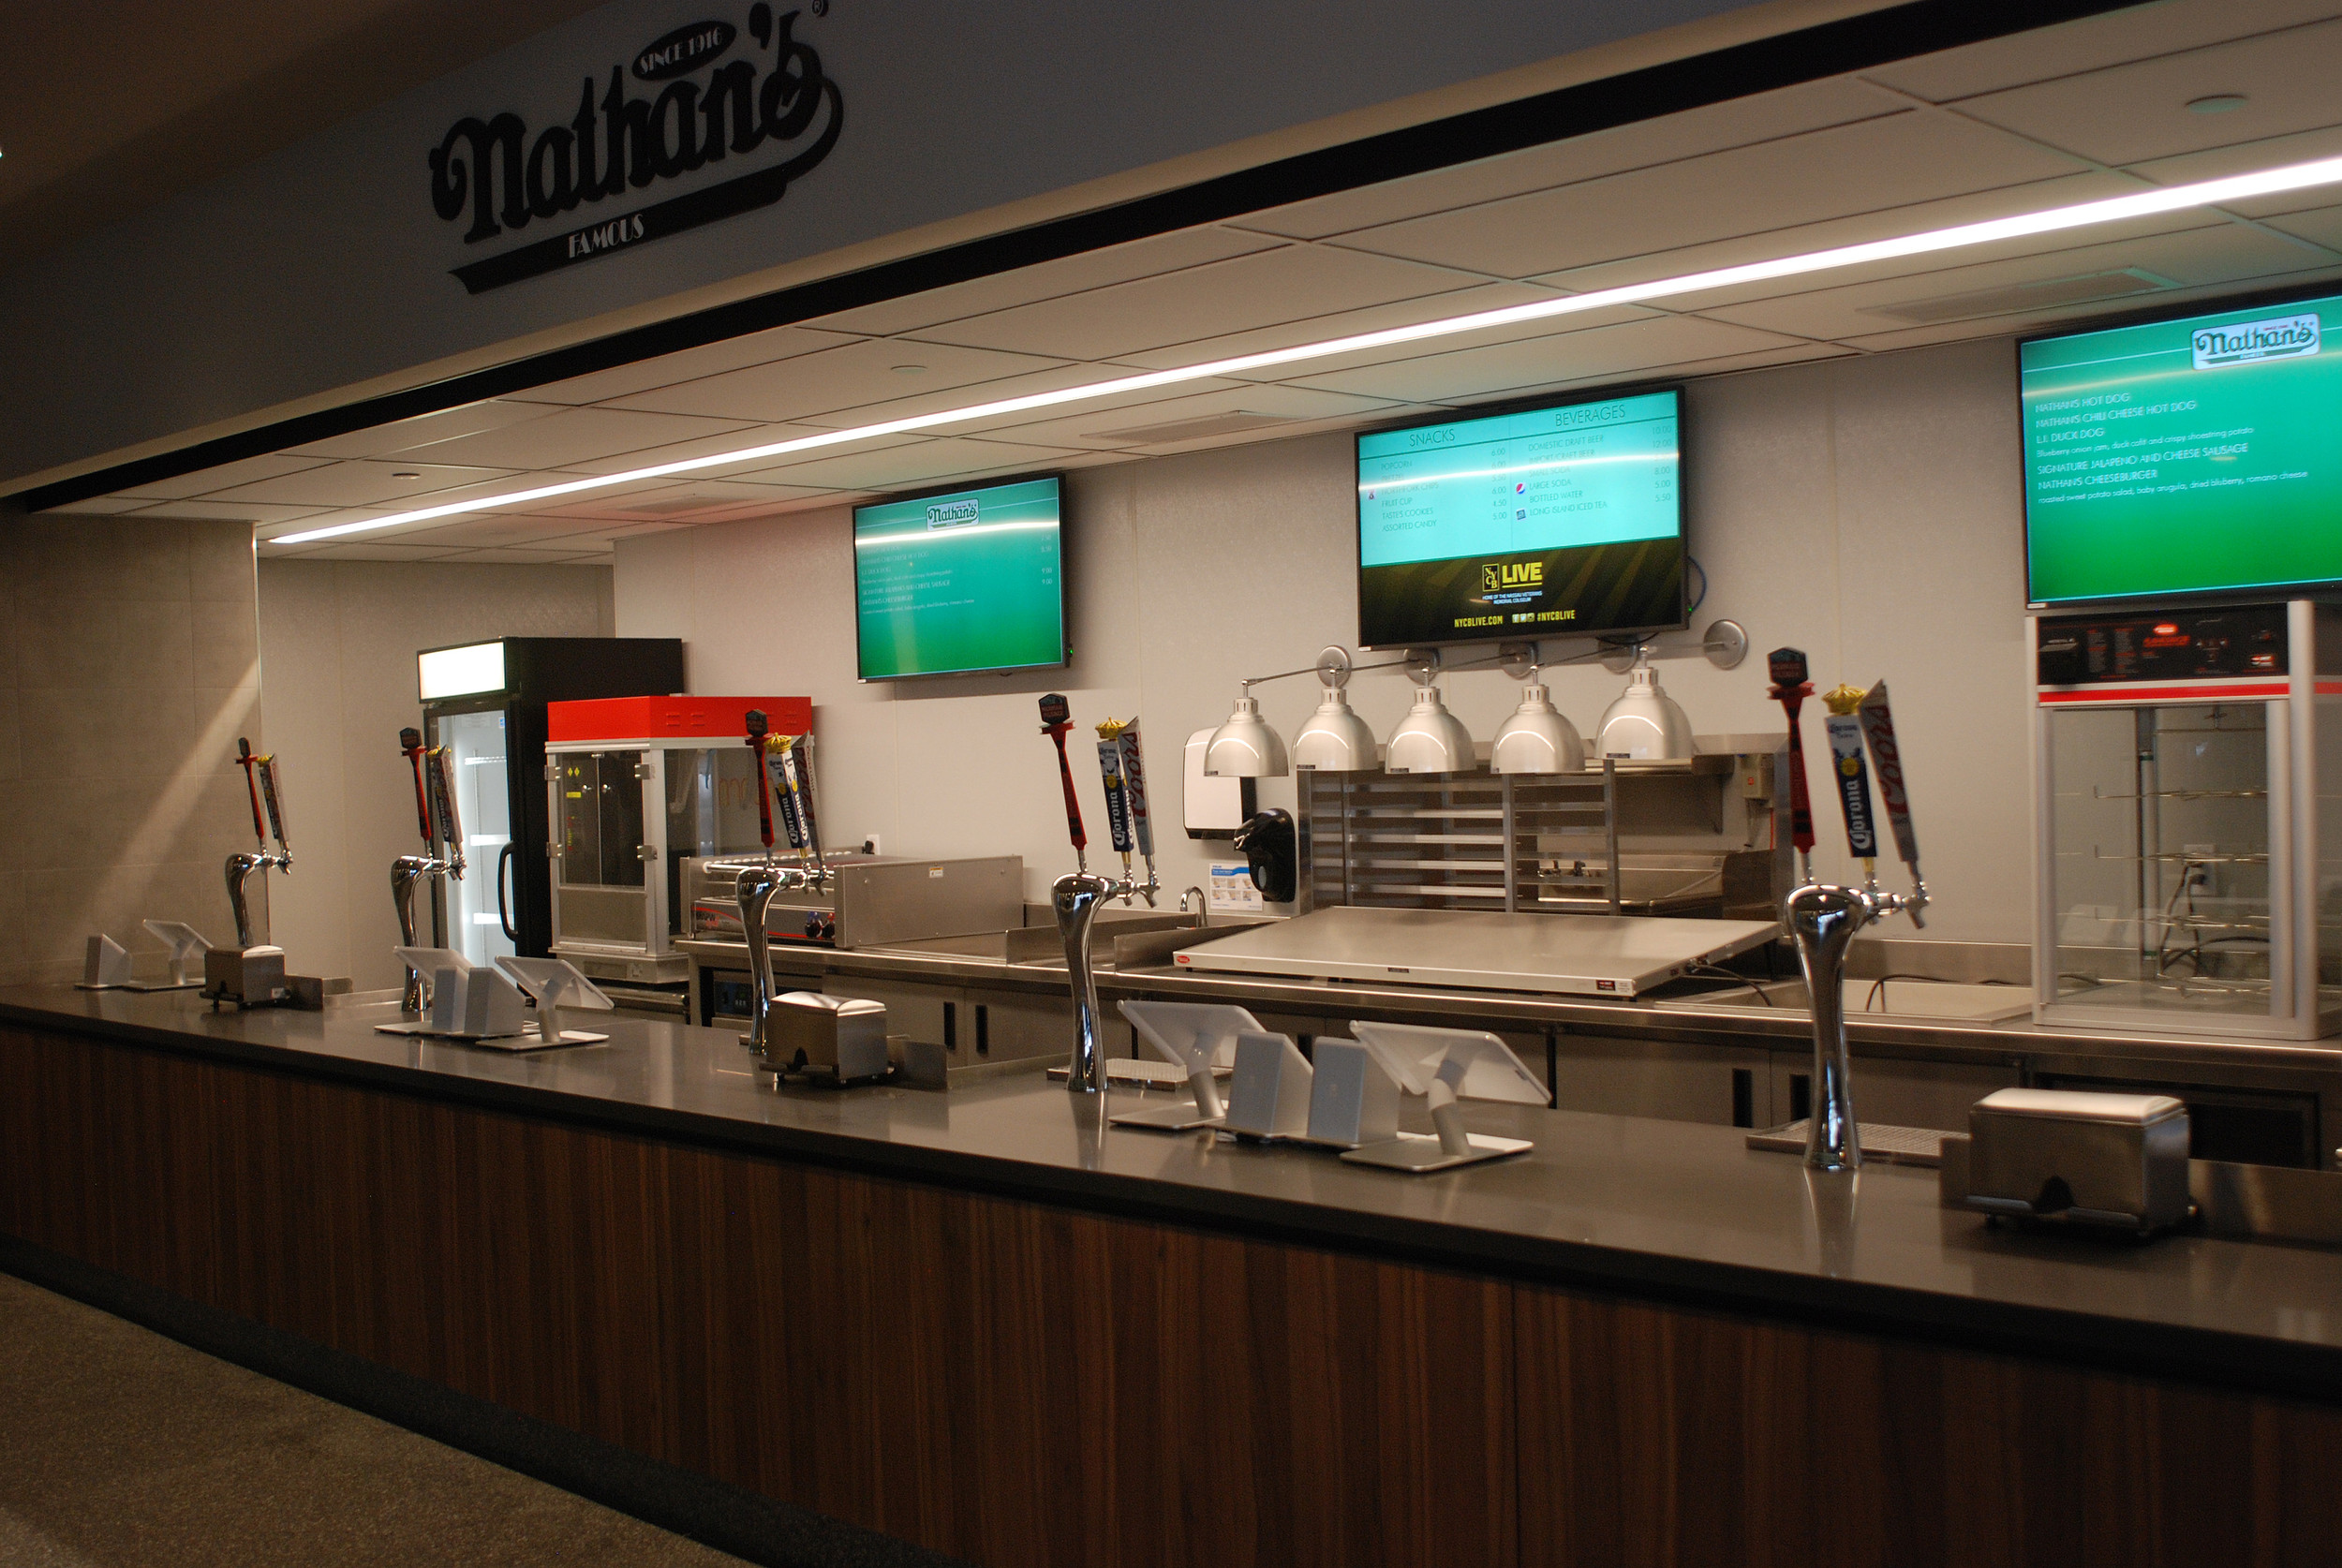 The Nathan's concession stand, front and center at the entrance to the Coliseum, awaits atendees.